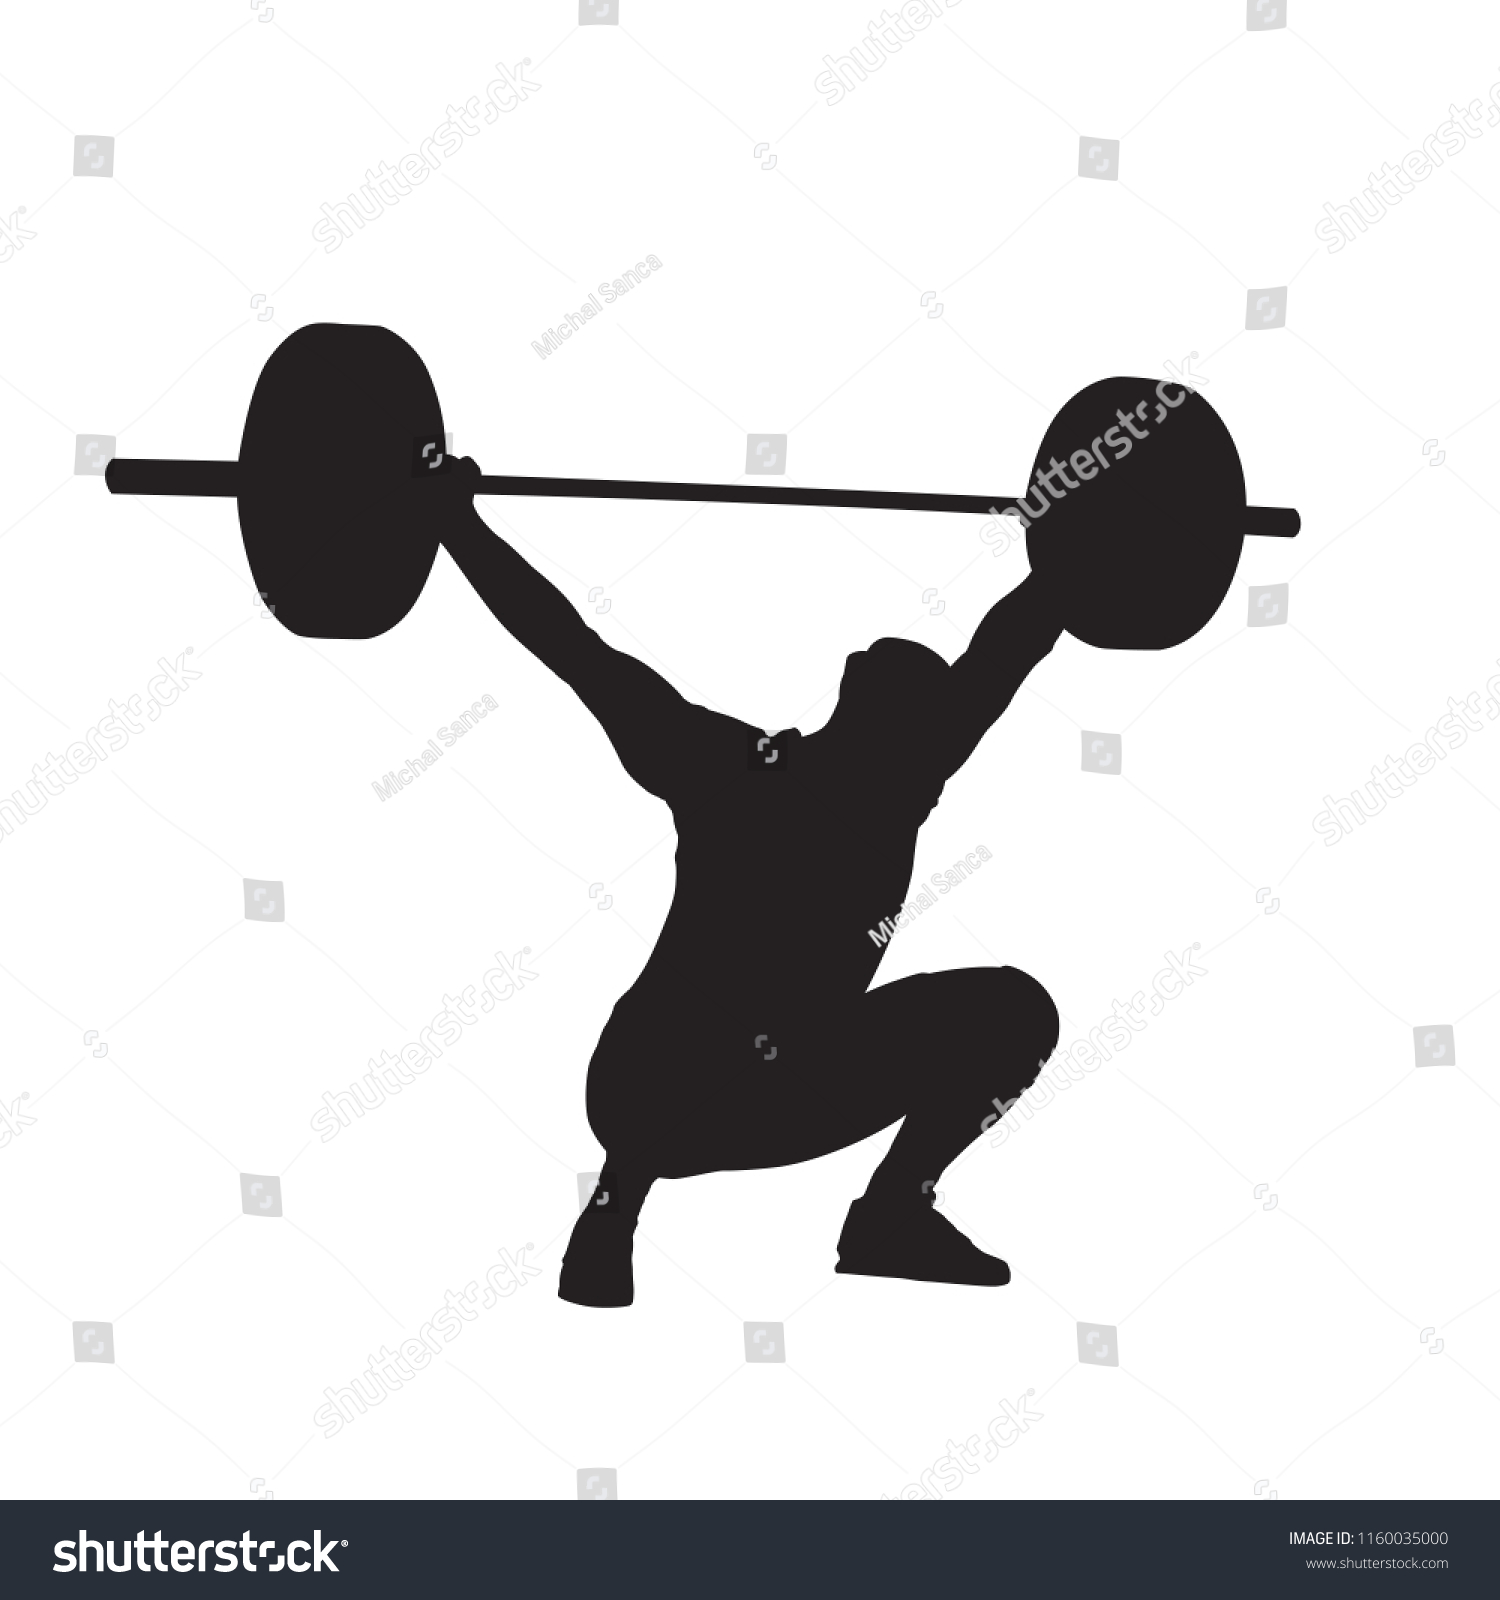 SVG of Weightlifter with big barbell, isolated vector silhouette. Weightlifting svg